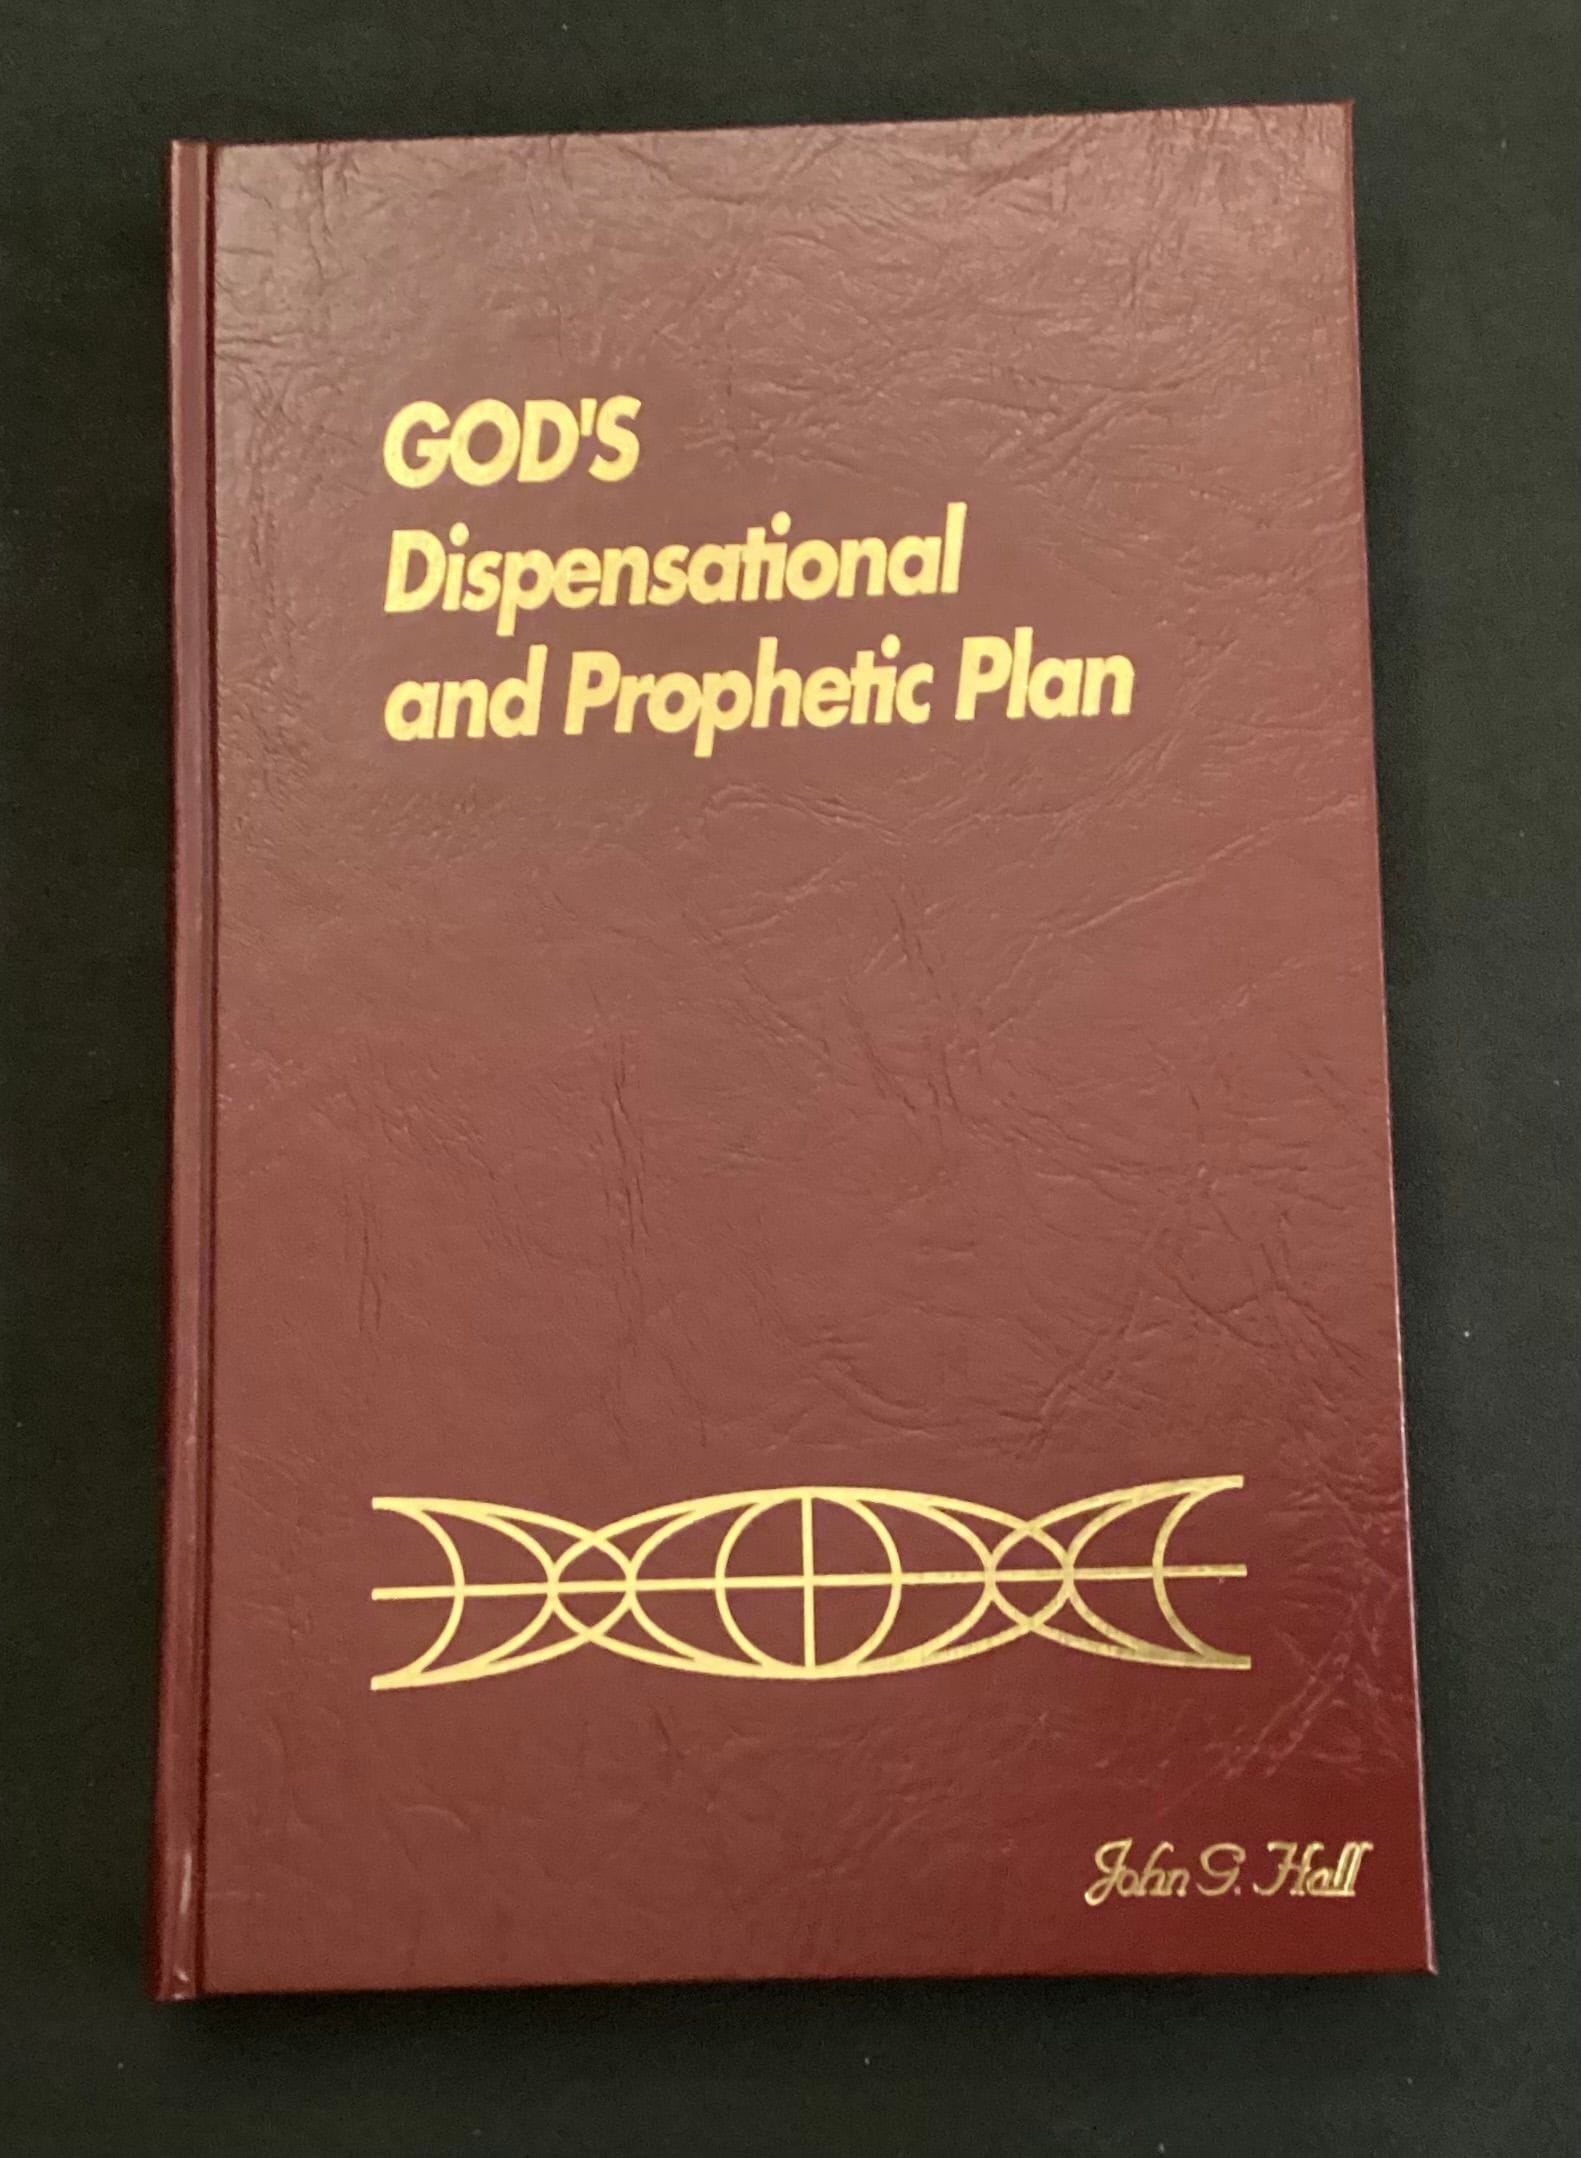 God's Dispensational and Prophetic Plan